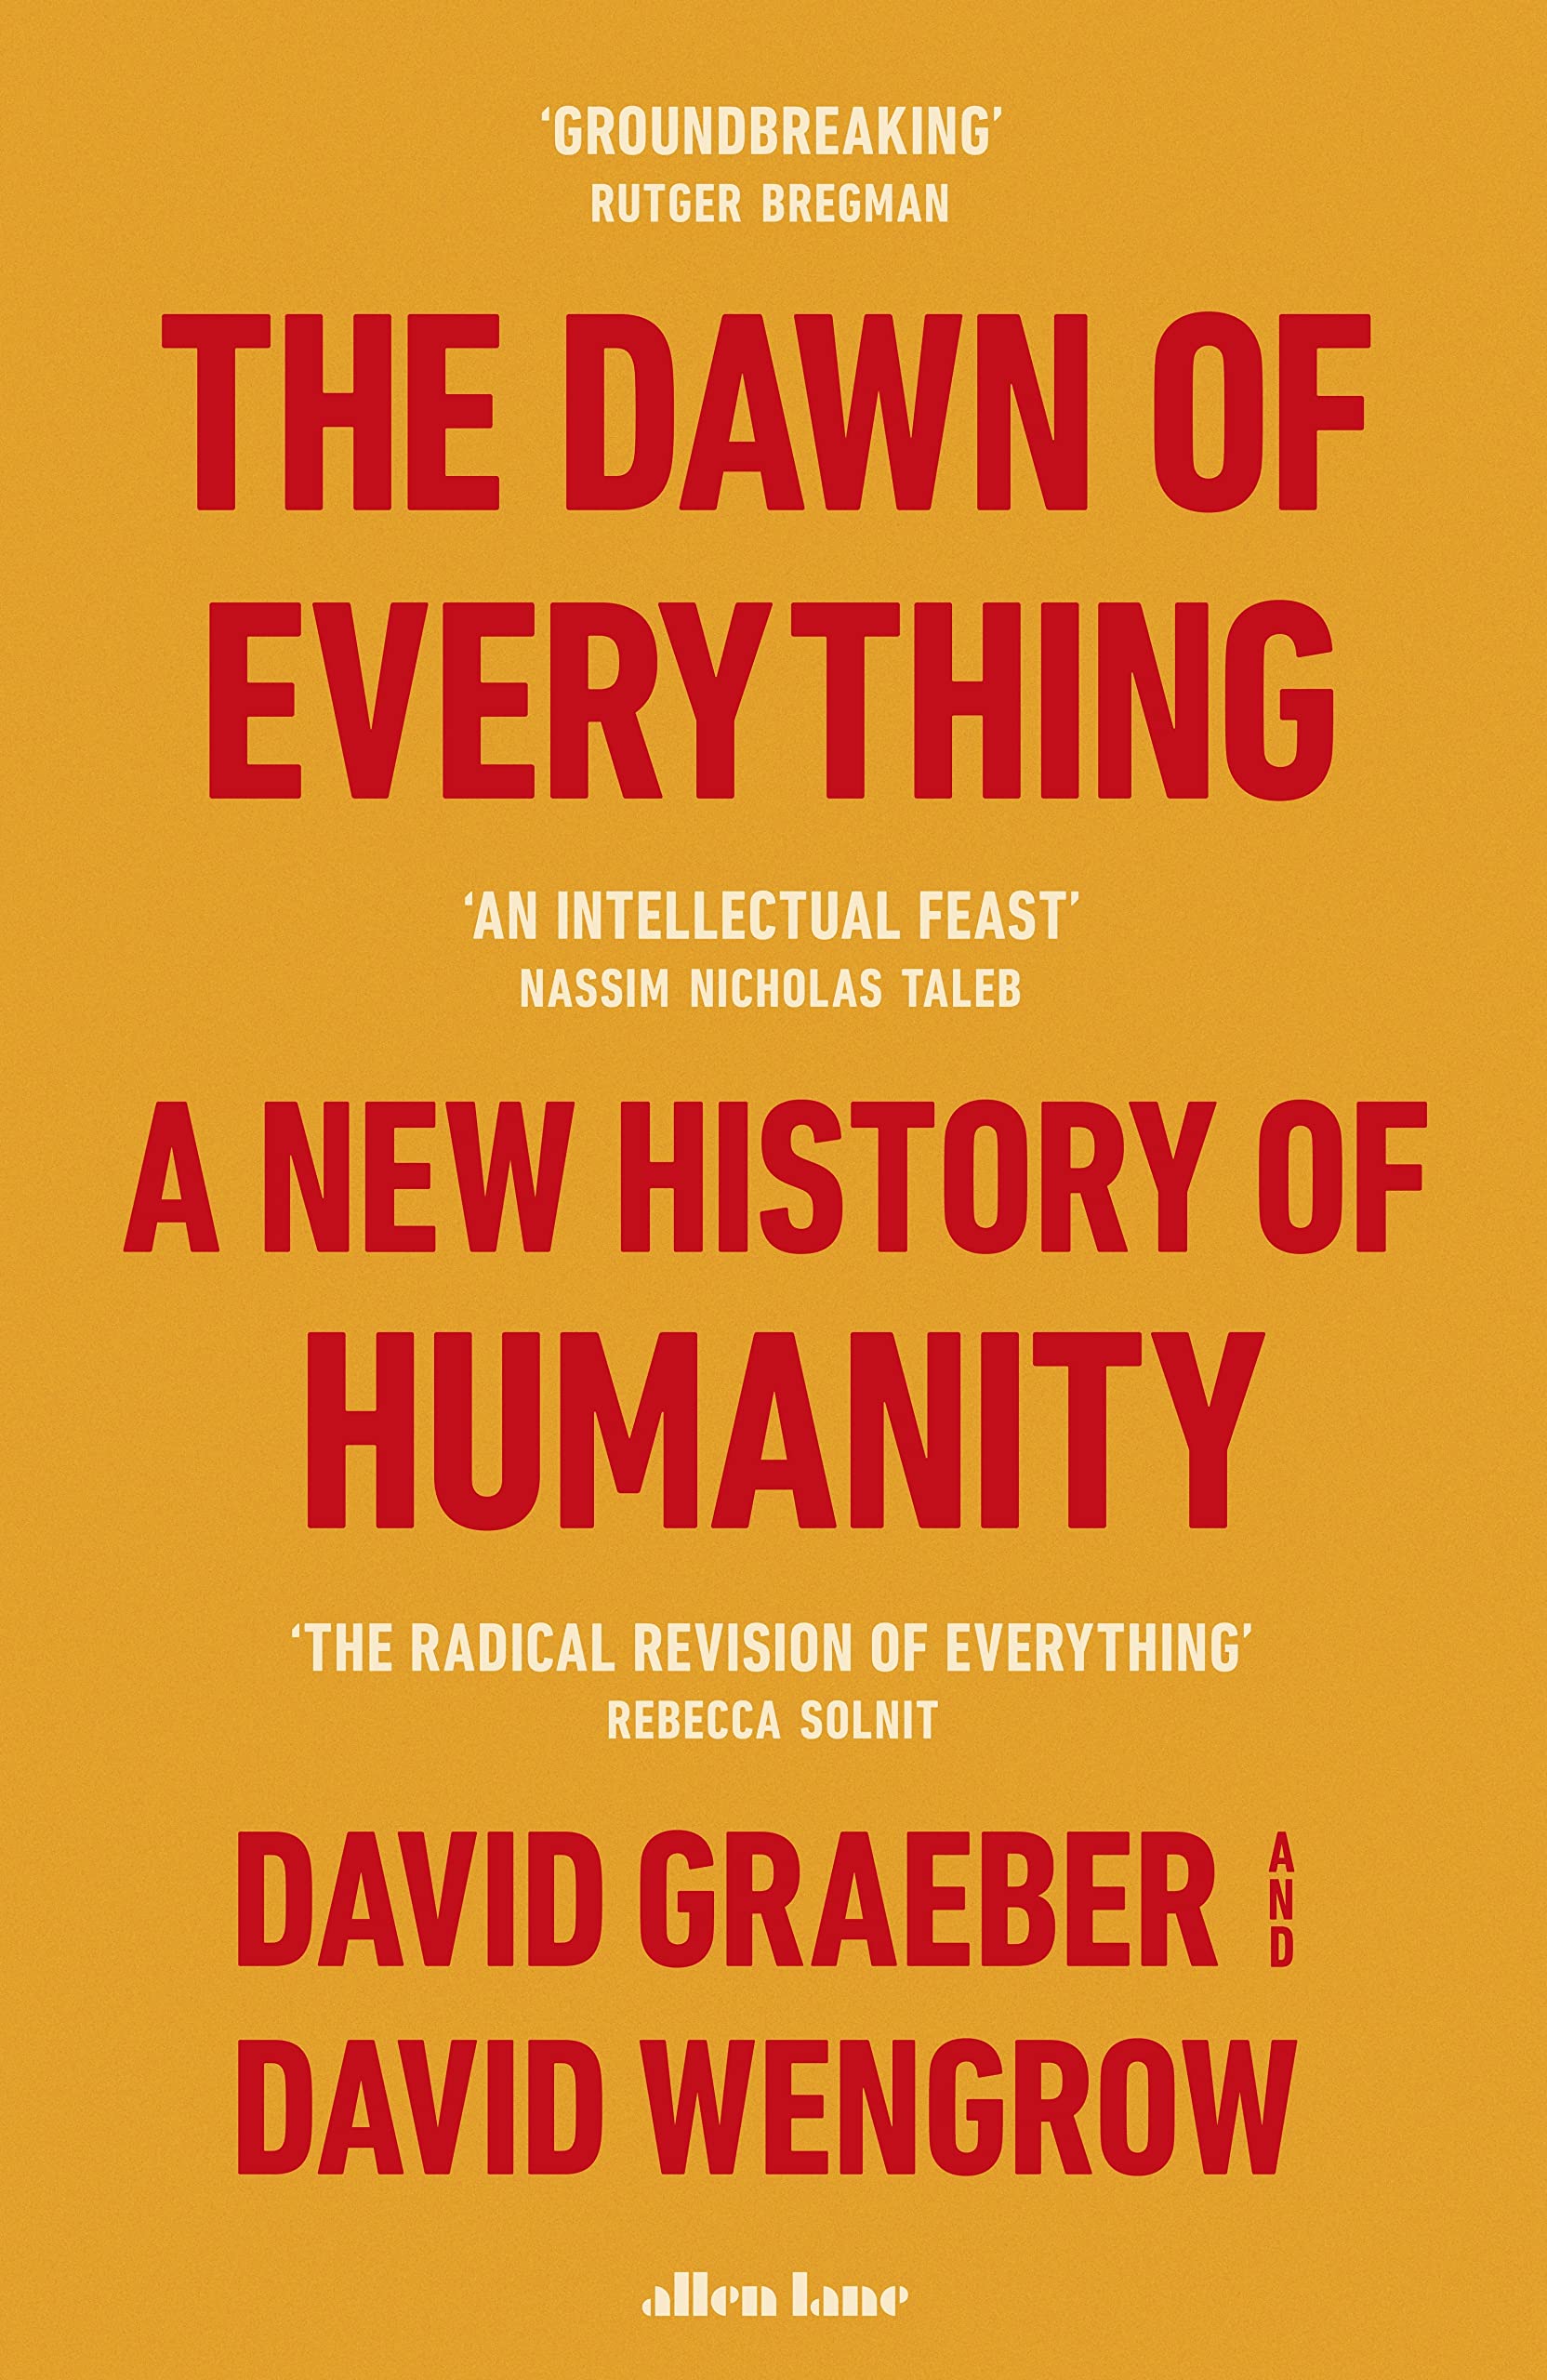 The Dawn of Everything: A New History of Humanity (David Graeber & David Wengrow)